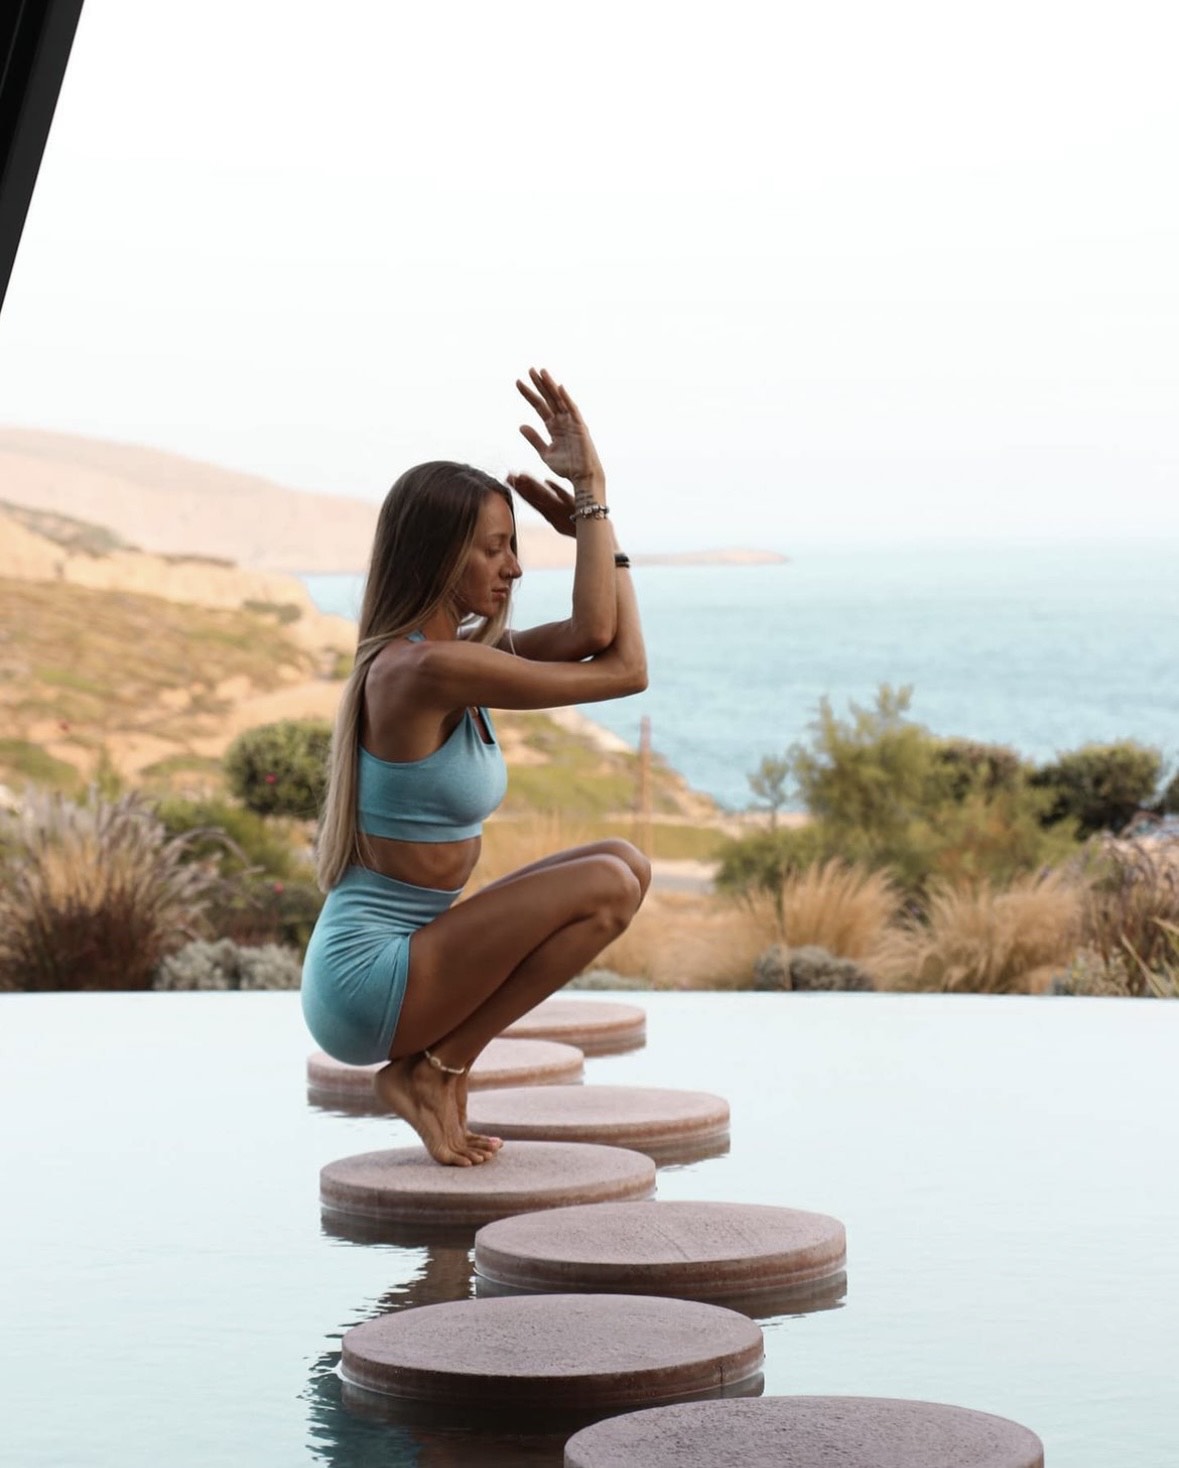 Stefania, an Omreset instructor is in Malasana pose on stones in the water.